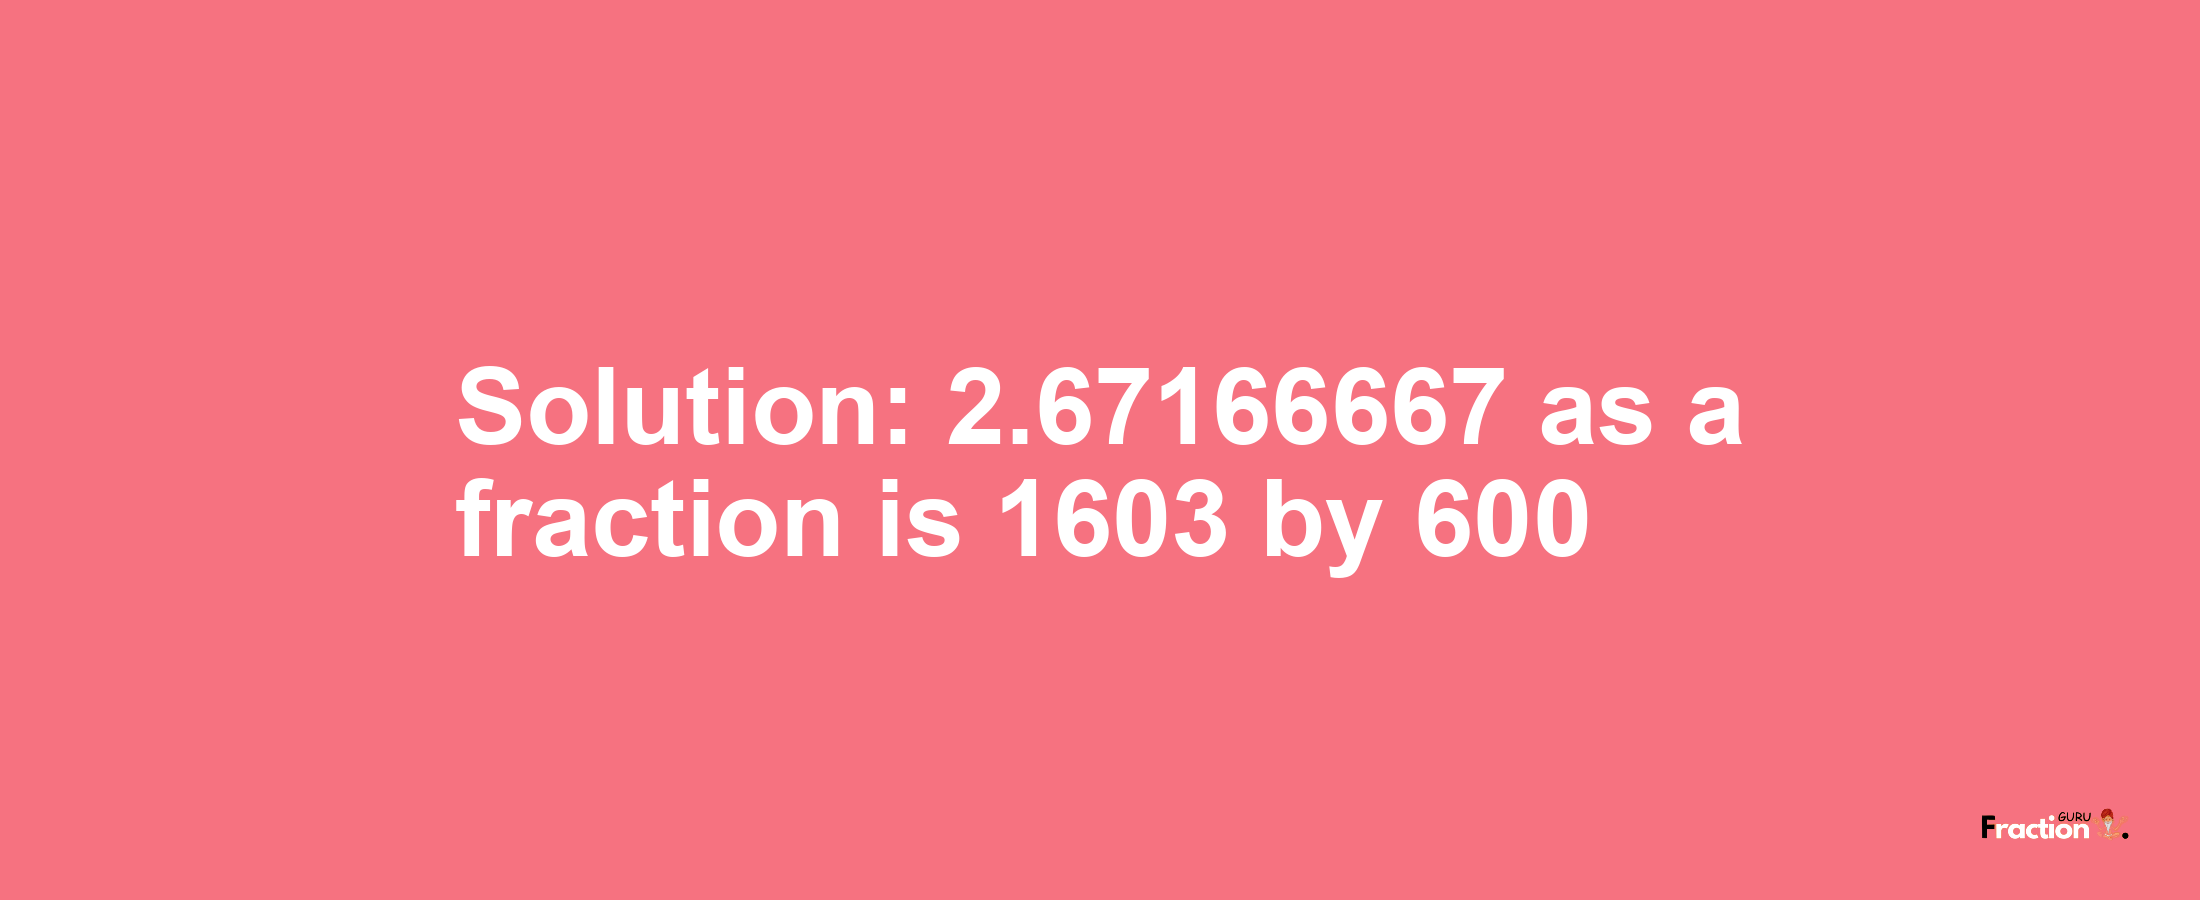 Solution:2.67166667 as a fraction is 1603/600